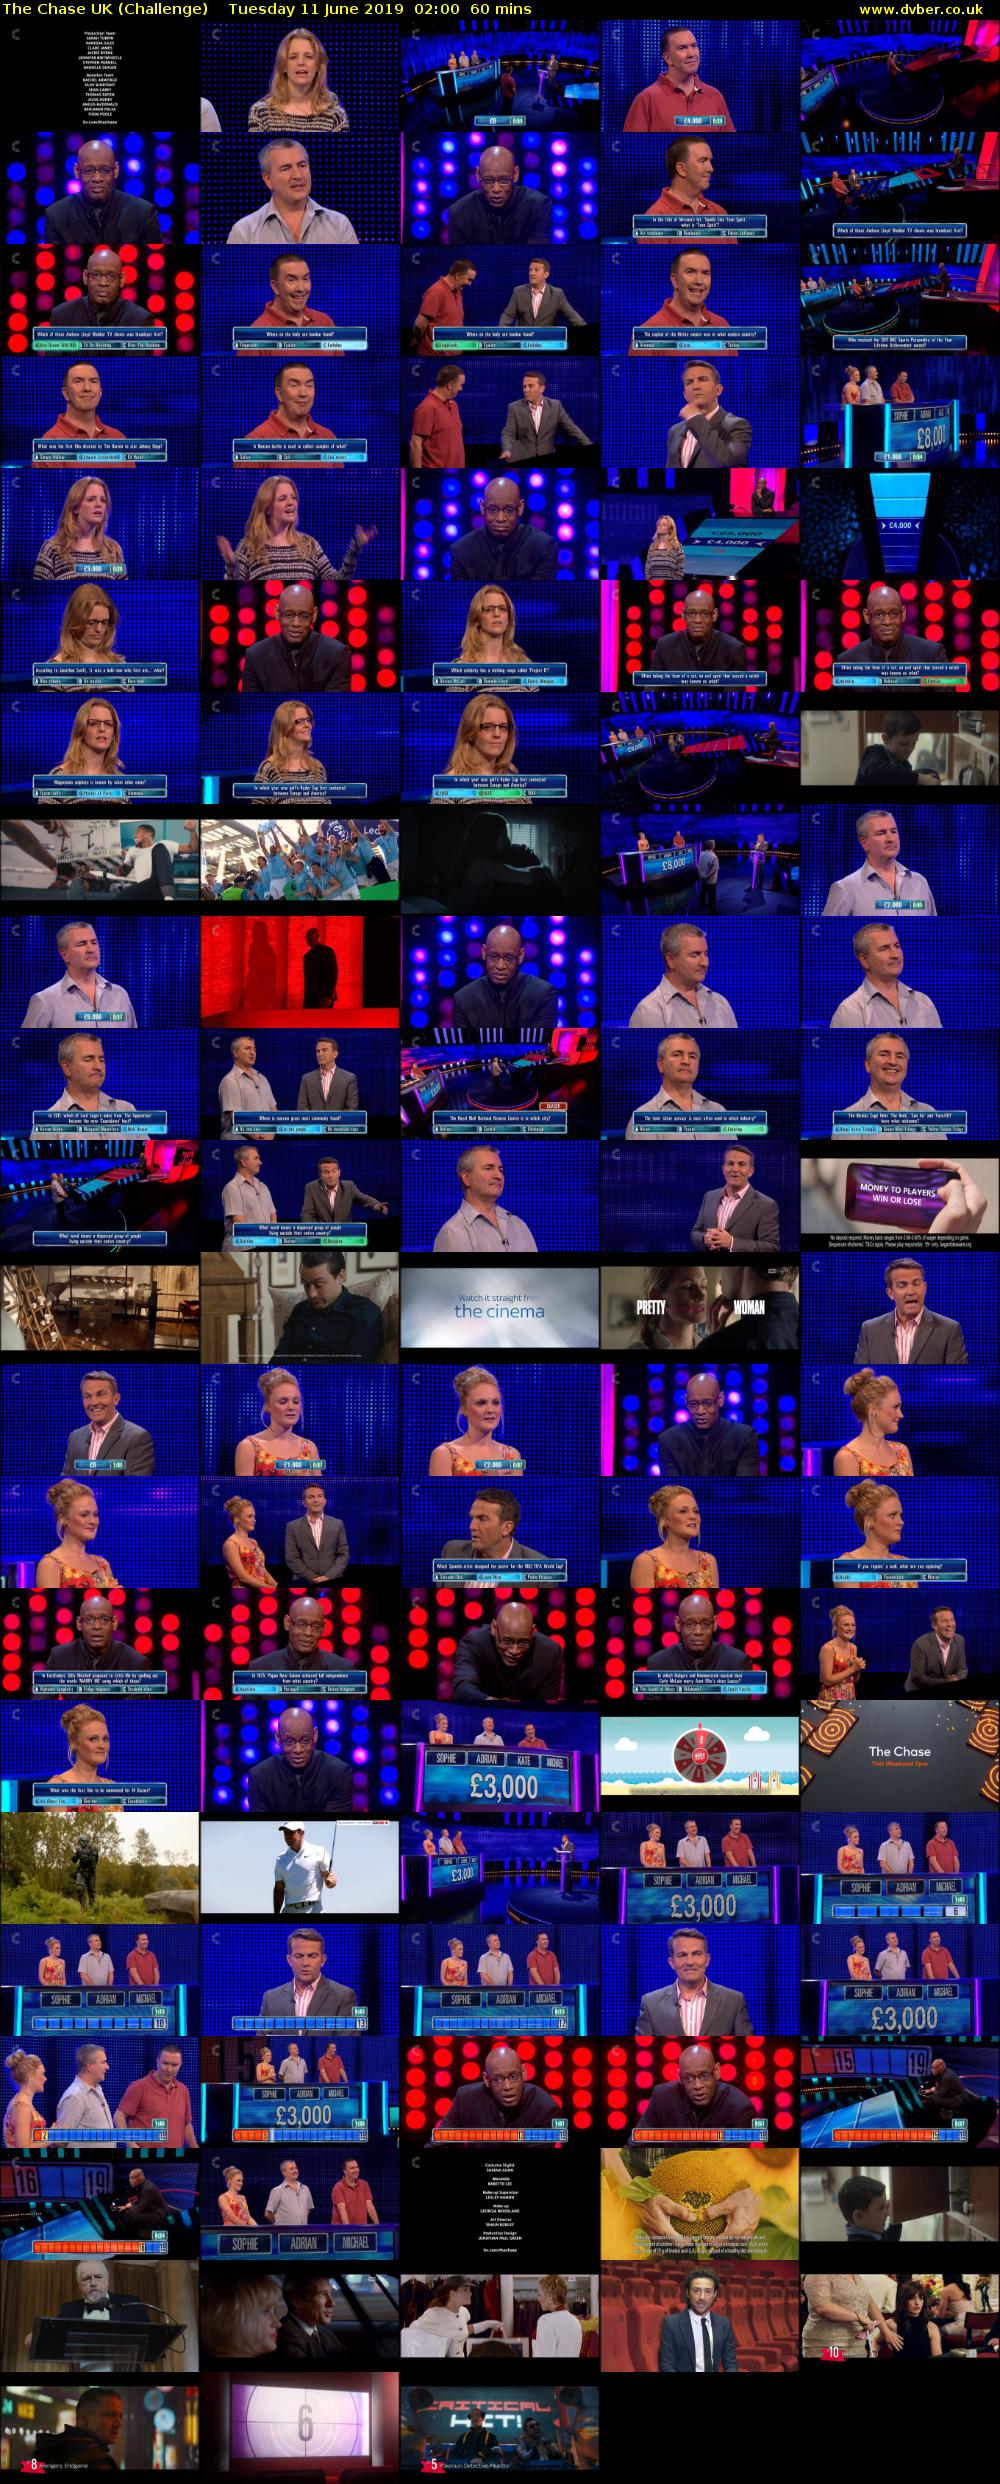 The Chase UK (Challenge) Tuesday 11 June 2019 02:00 - 03:00